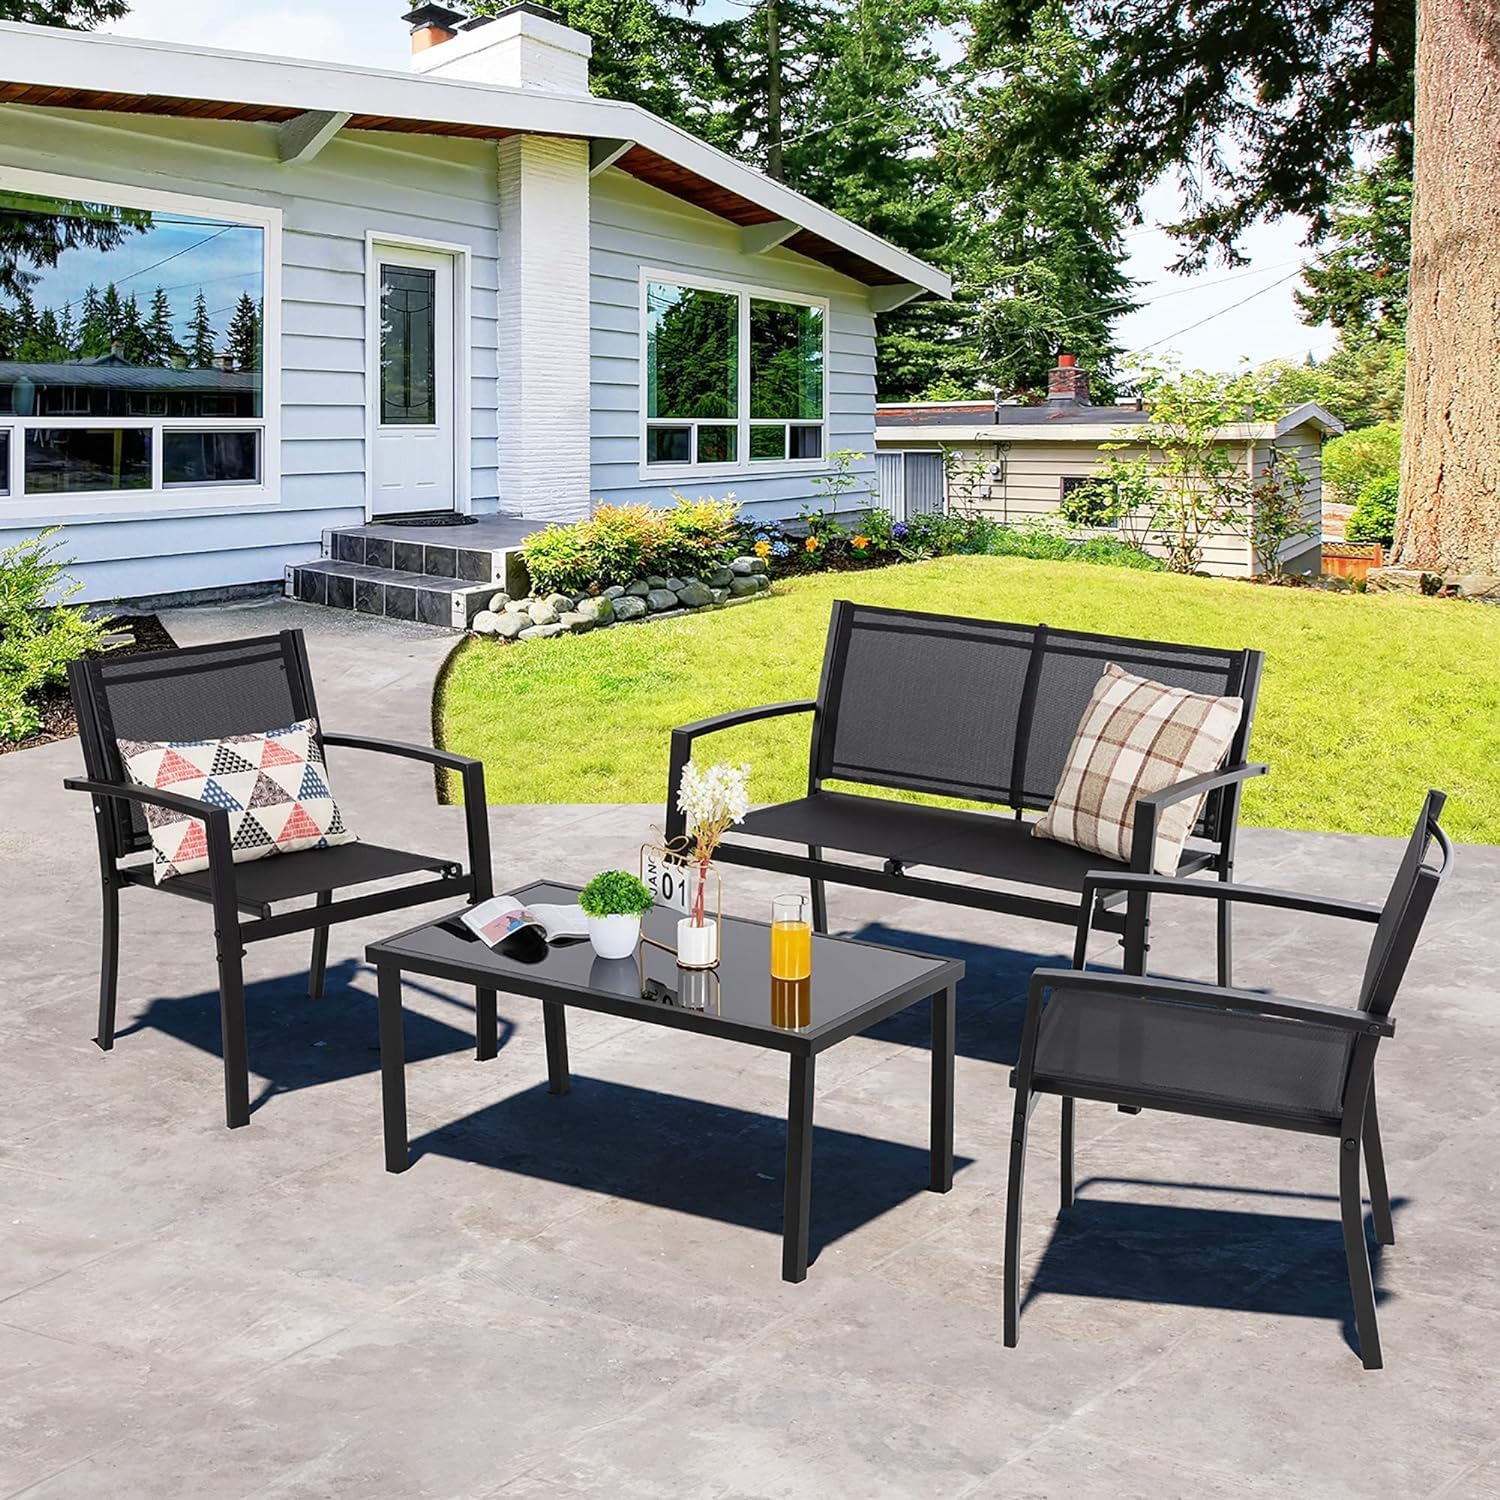 Gizoon WR250 4 Piece Outdoor Patio Furniture Set with Loveseat and 2 Single Chairs